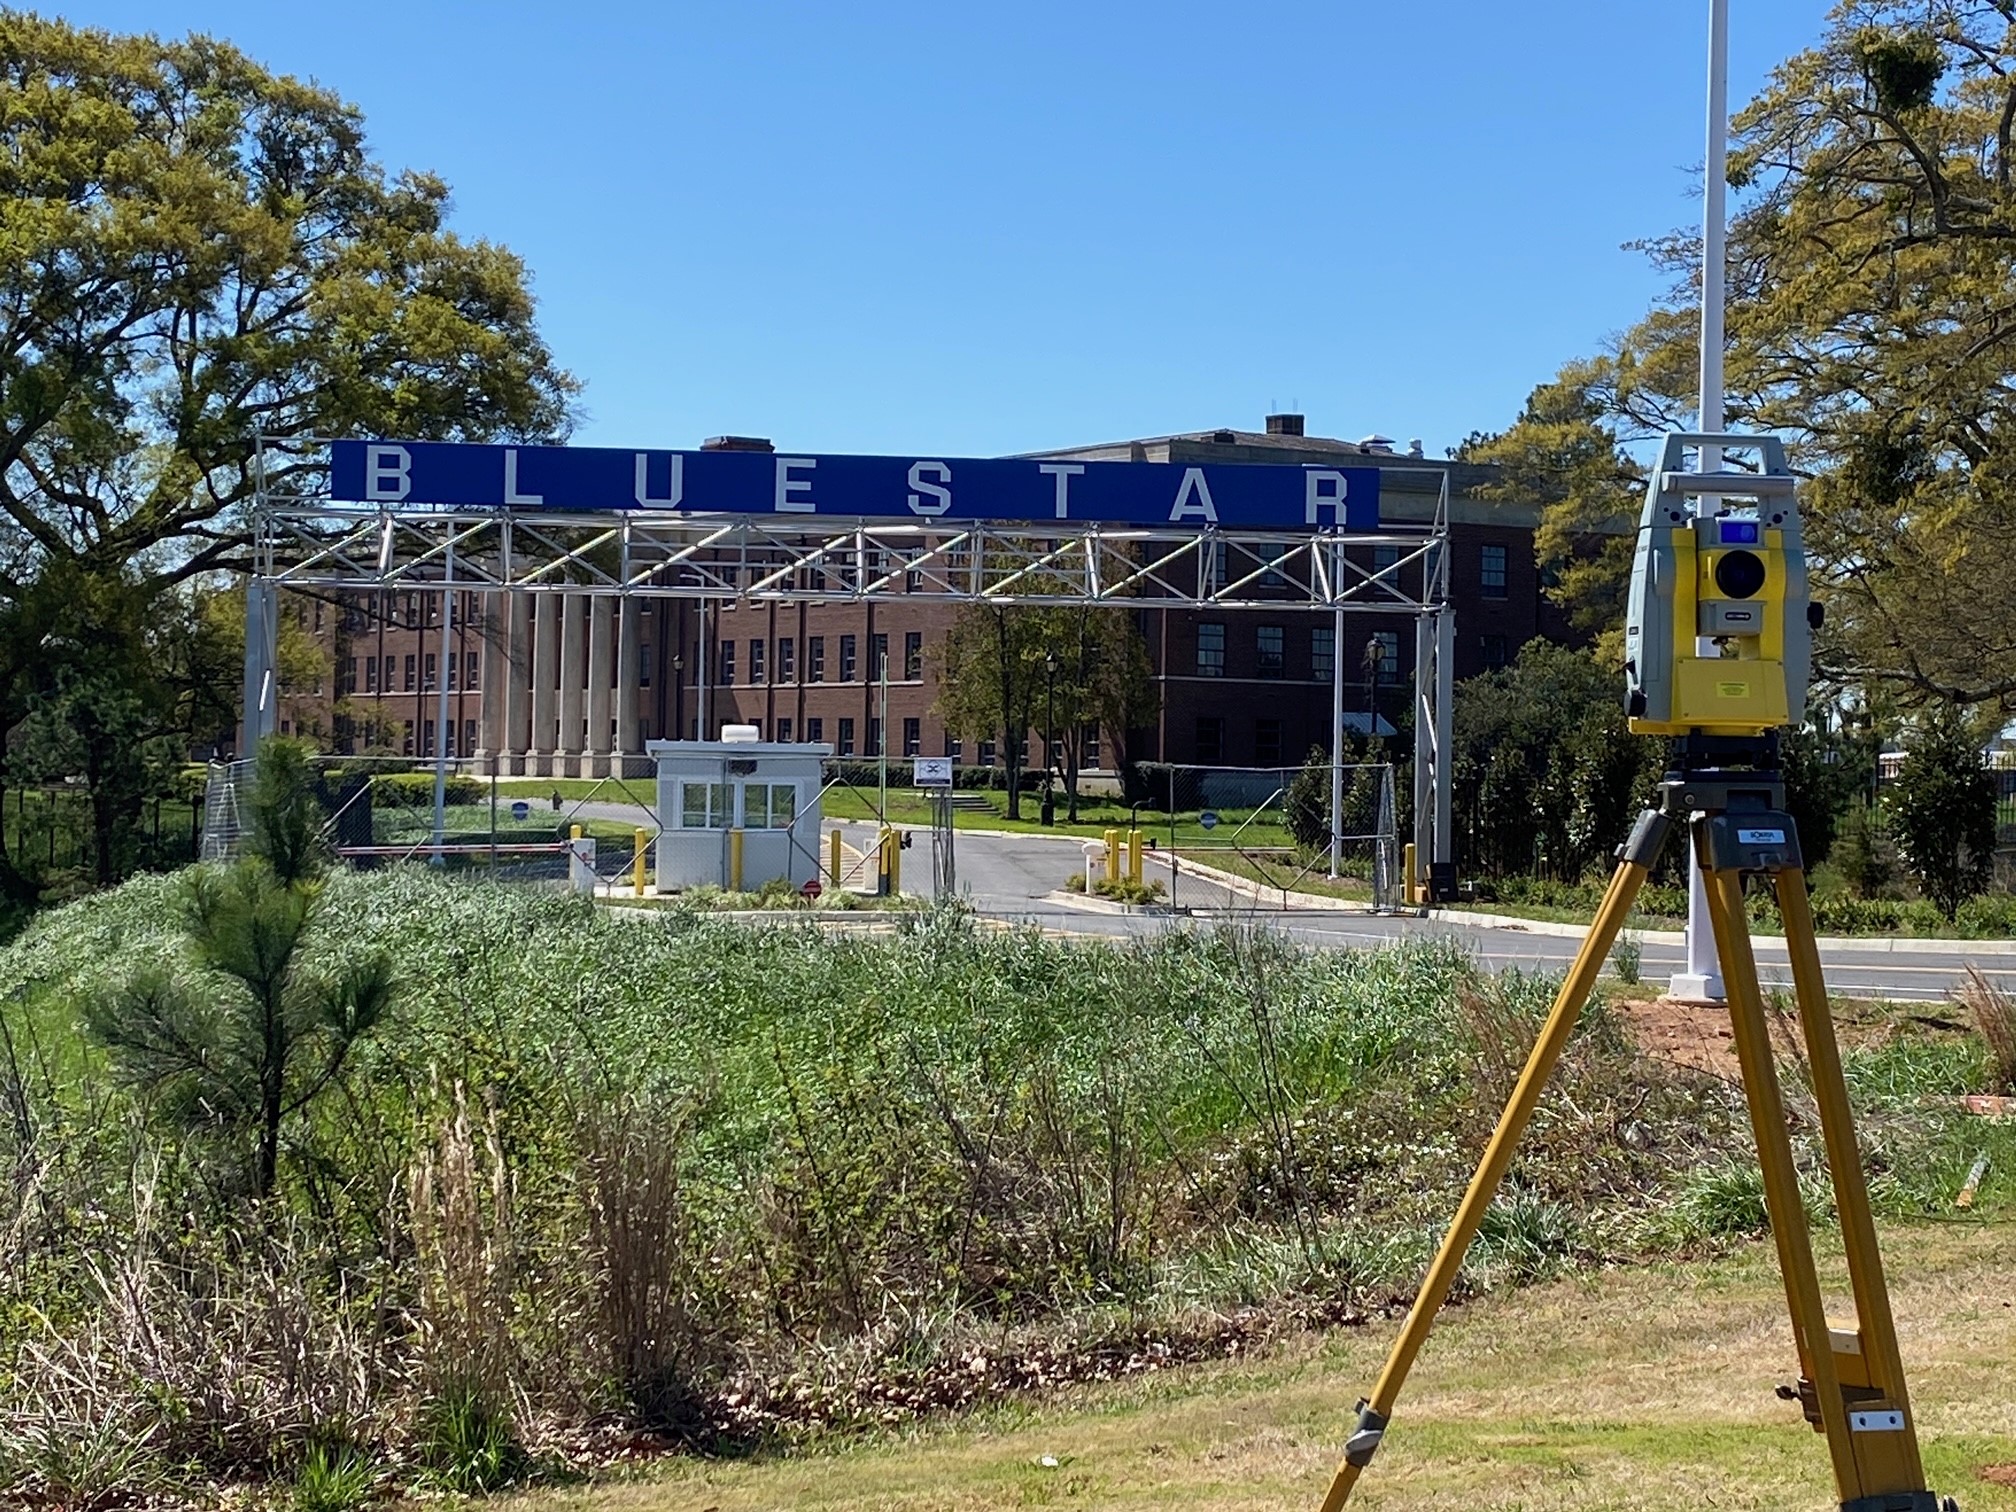 A survey mapping camera on a tripod sitting on the lawn in front of the Blue Star Studios facility gates.